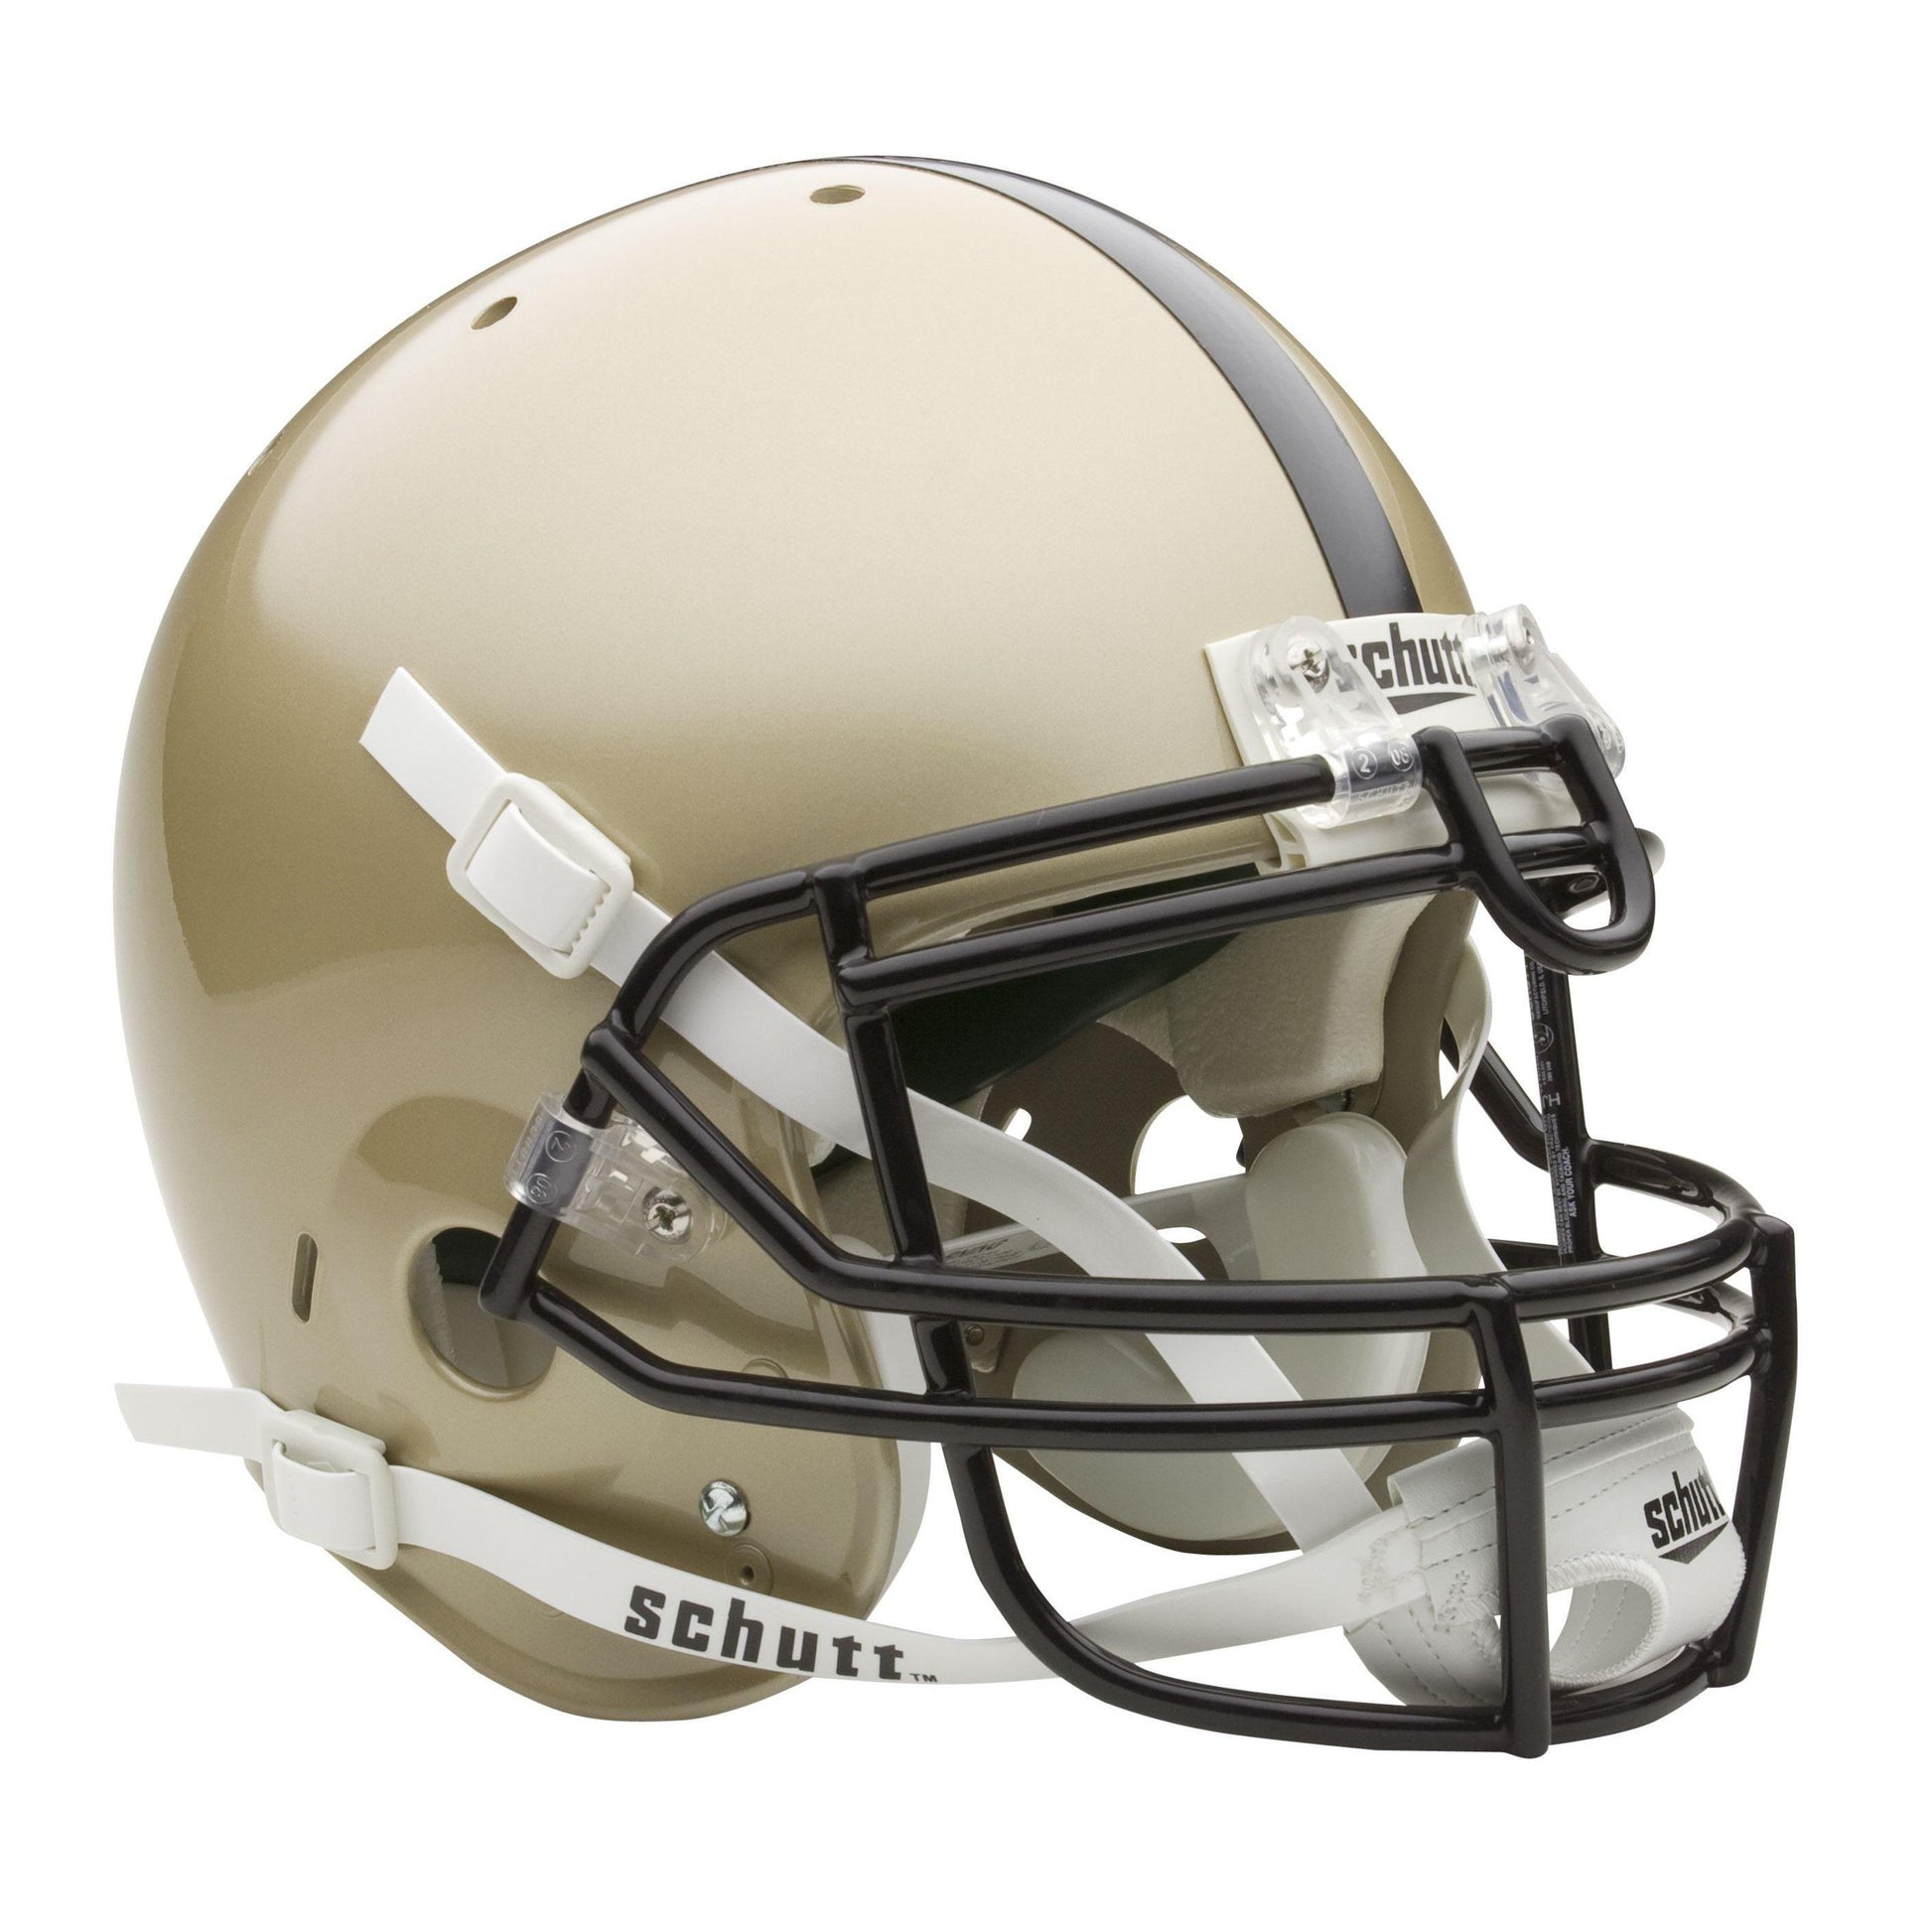 Army Knights College Football Collectible Schutt Mini Helmet - Picture Inside - FANZ Collectibles - Fanz Collectibles